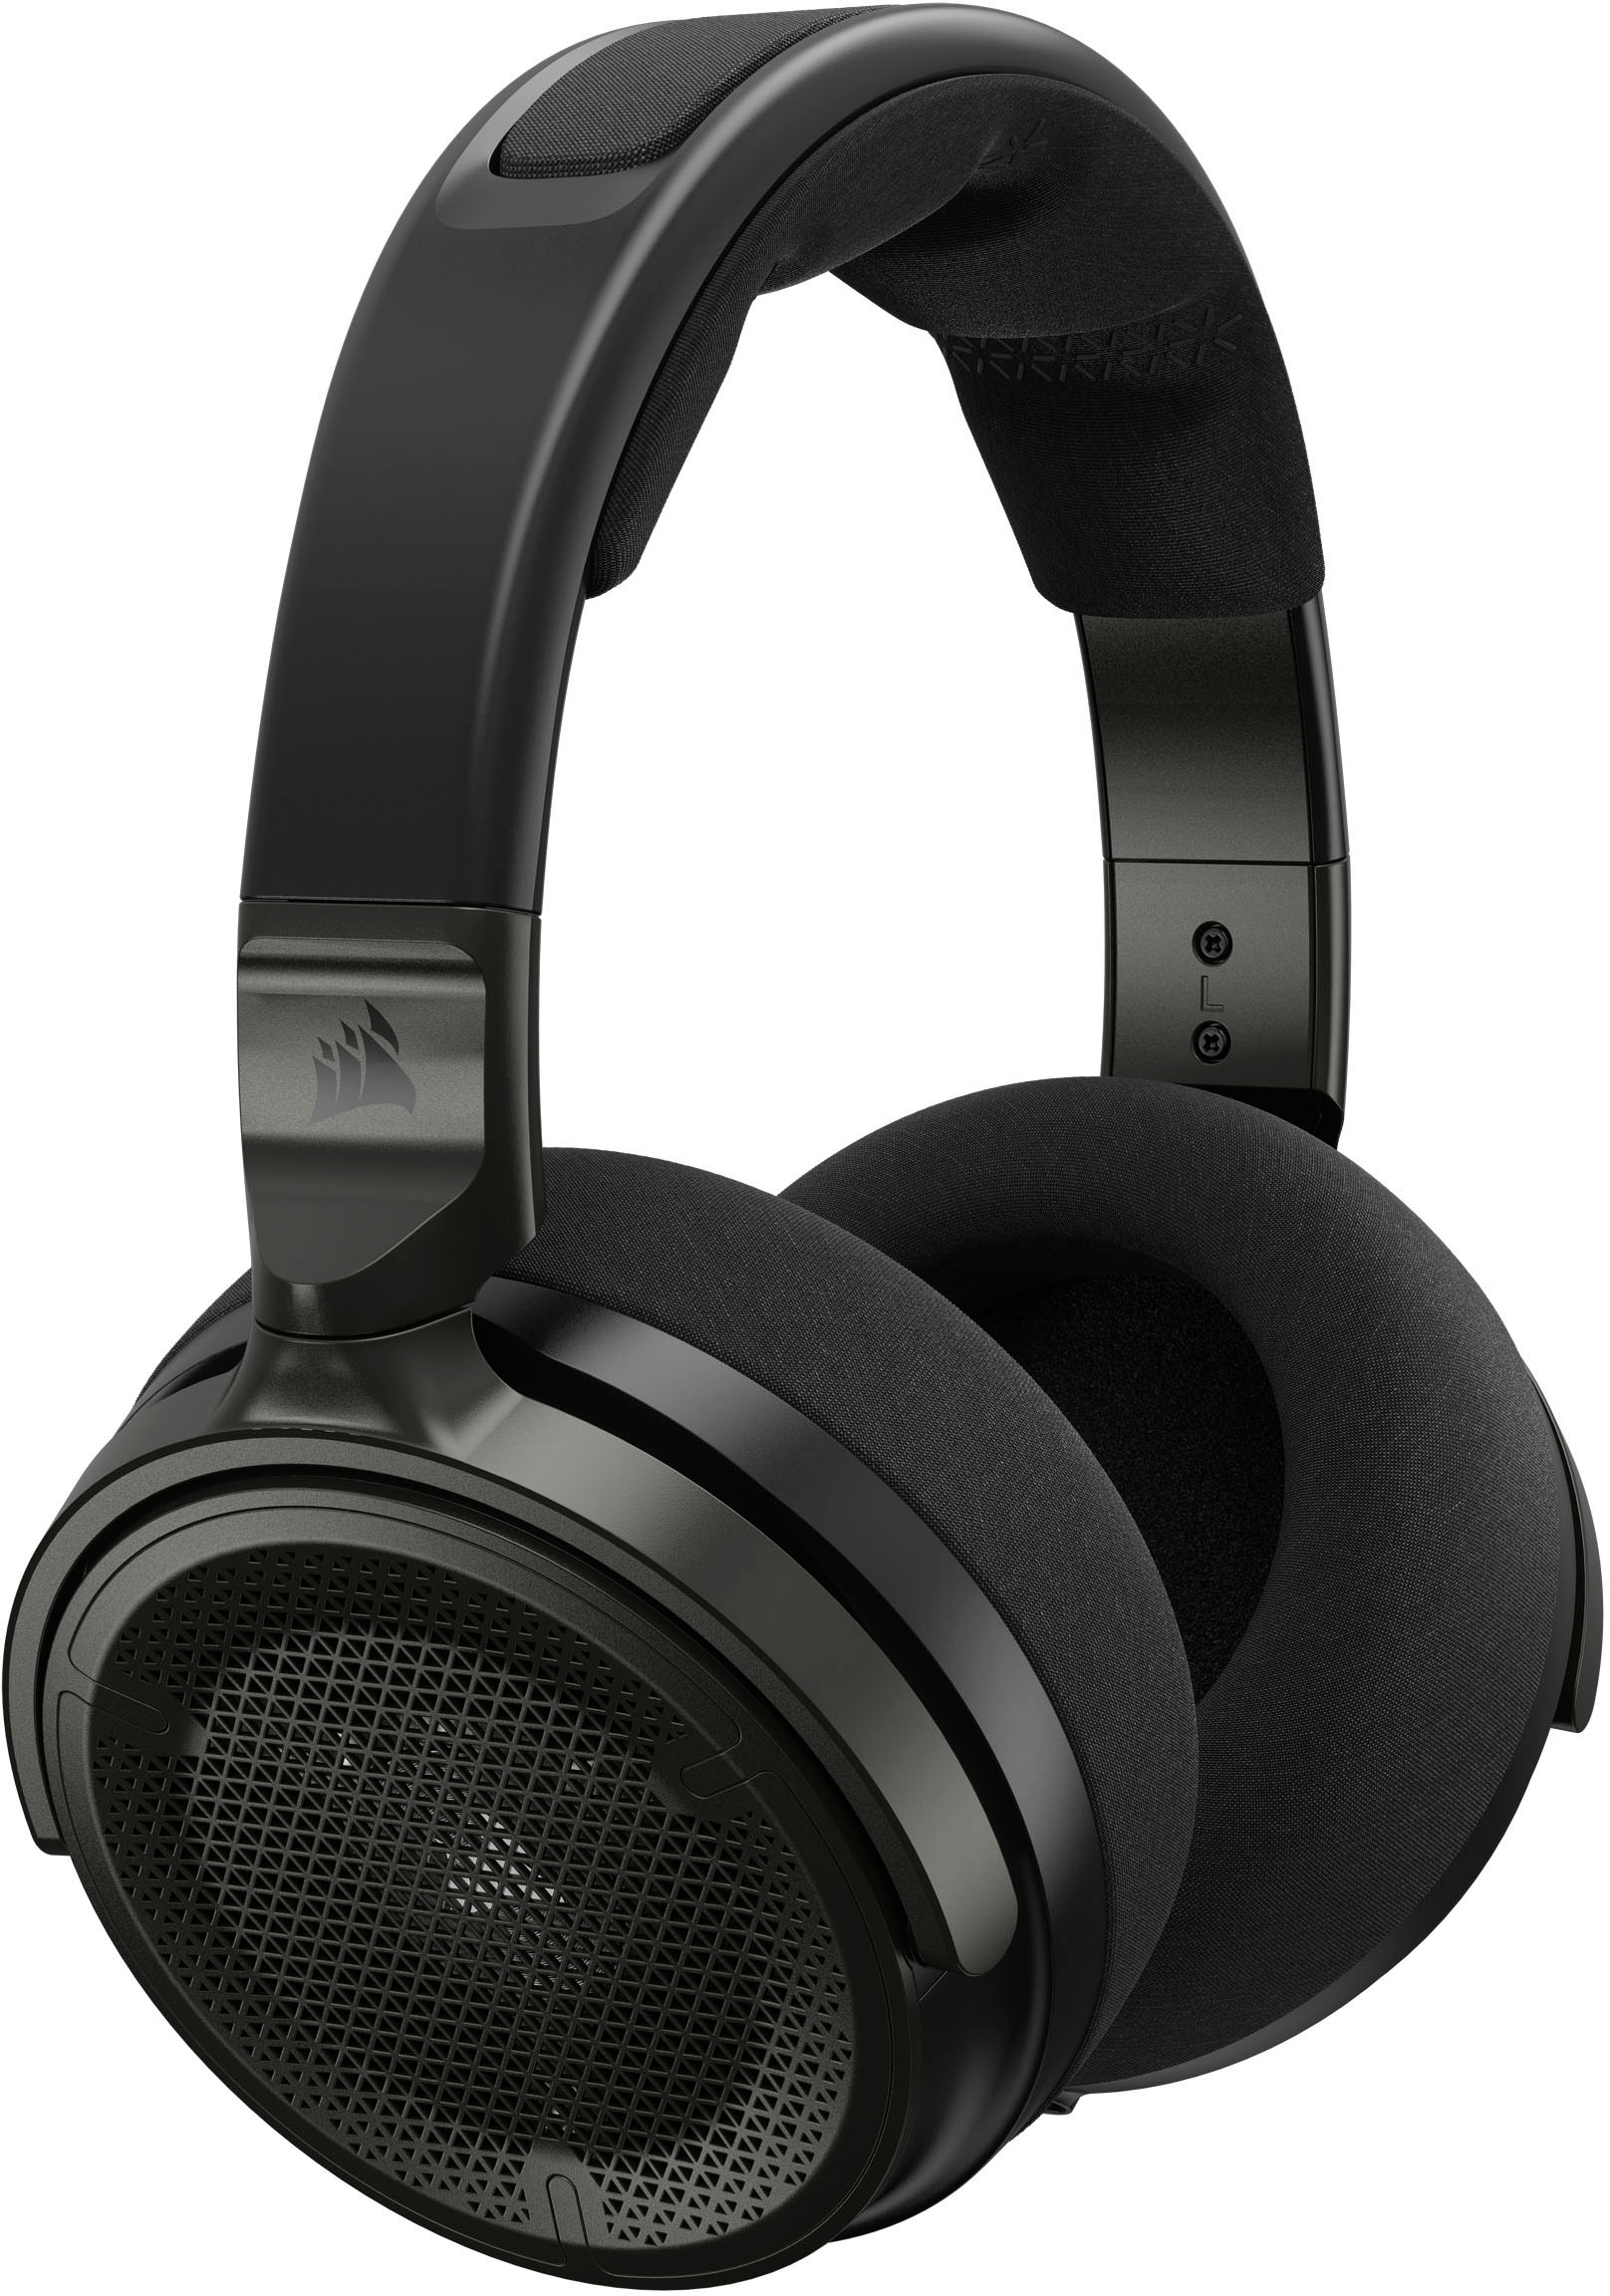 Wired Headset - CA-9011370-NA Buy Carbon PRO Streaming/Gaming VIRTUOSO Best CORSAIR Open Back